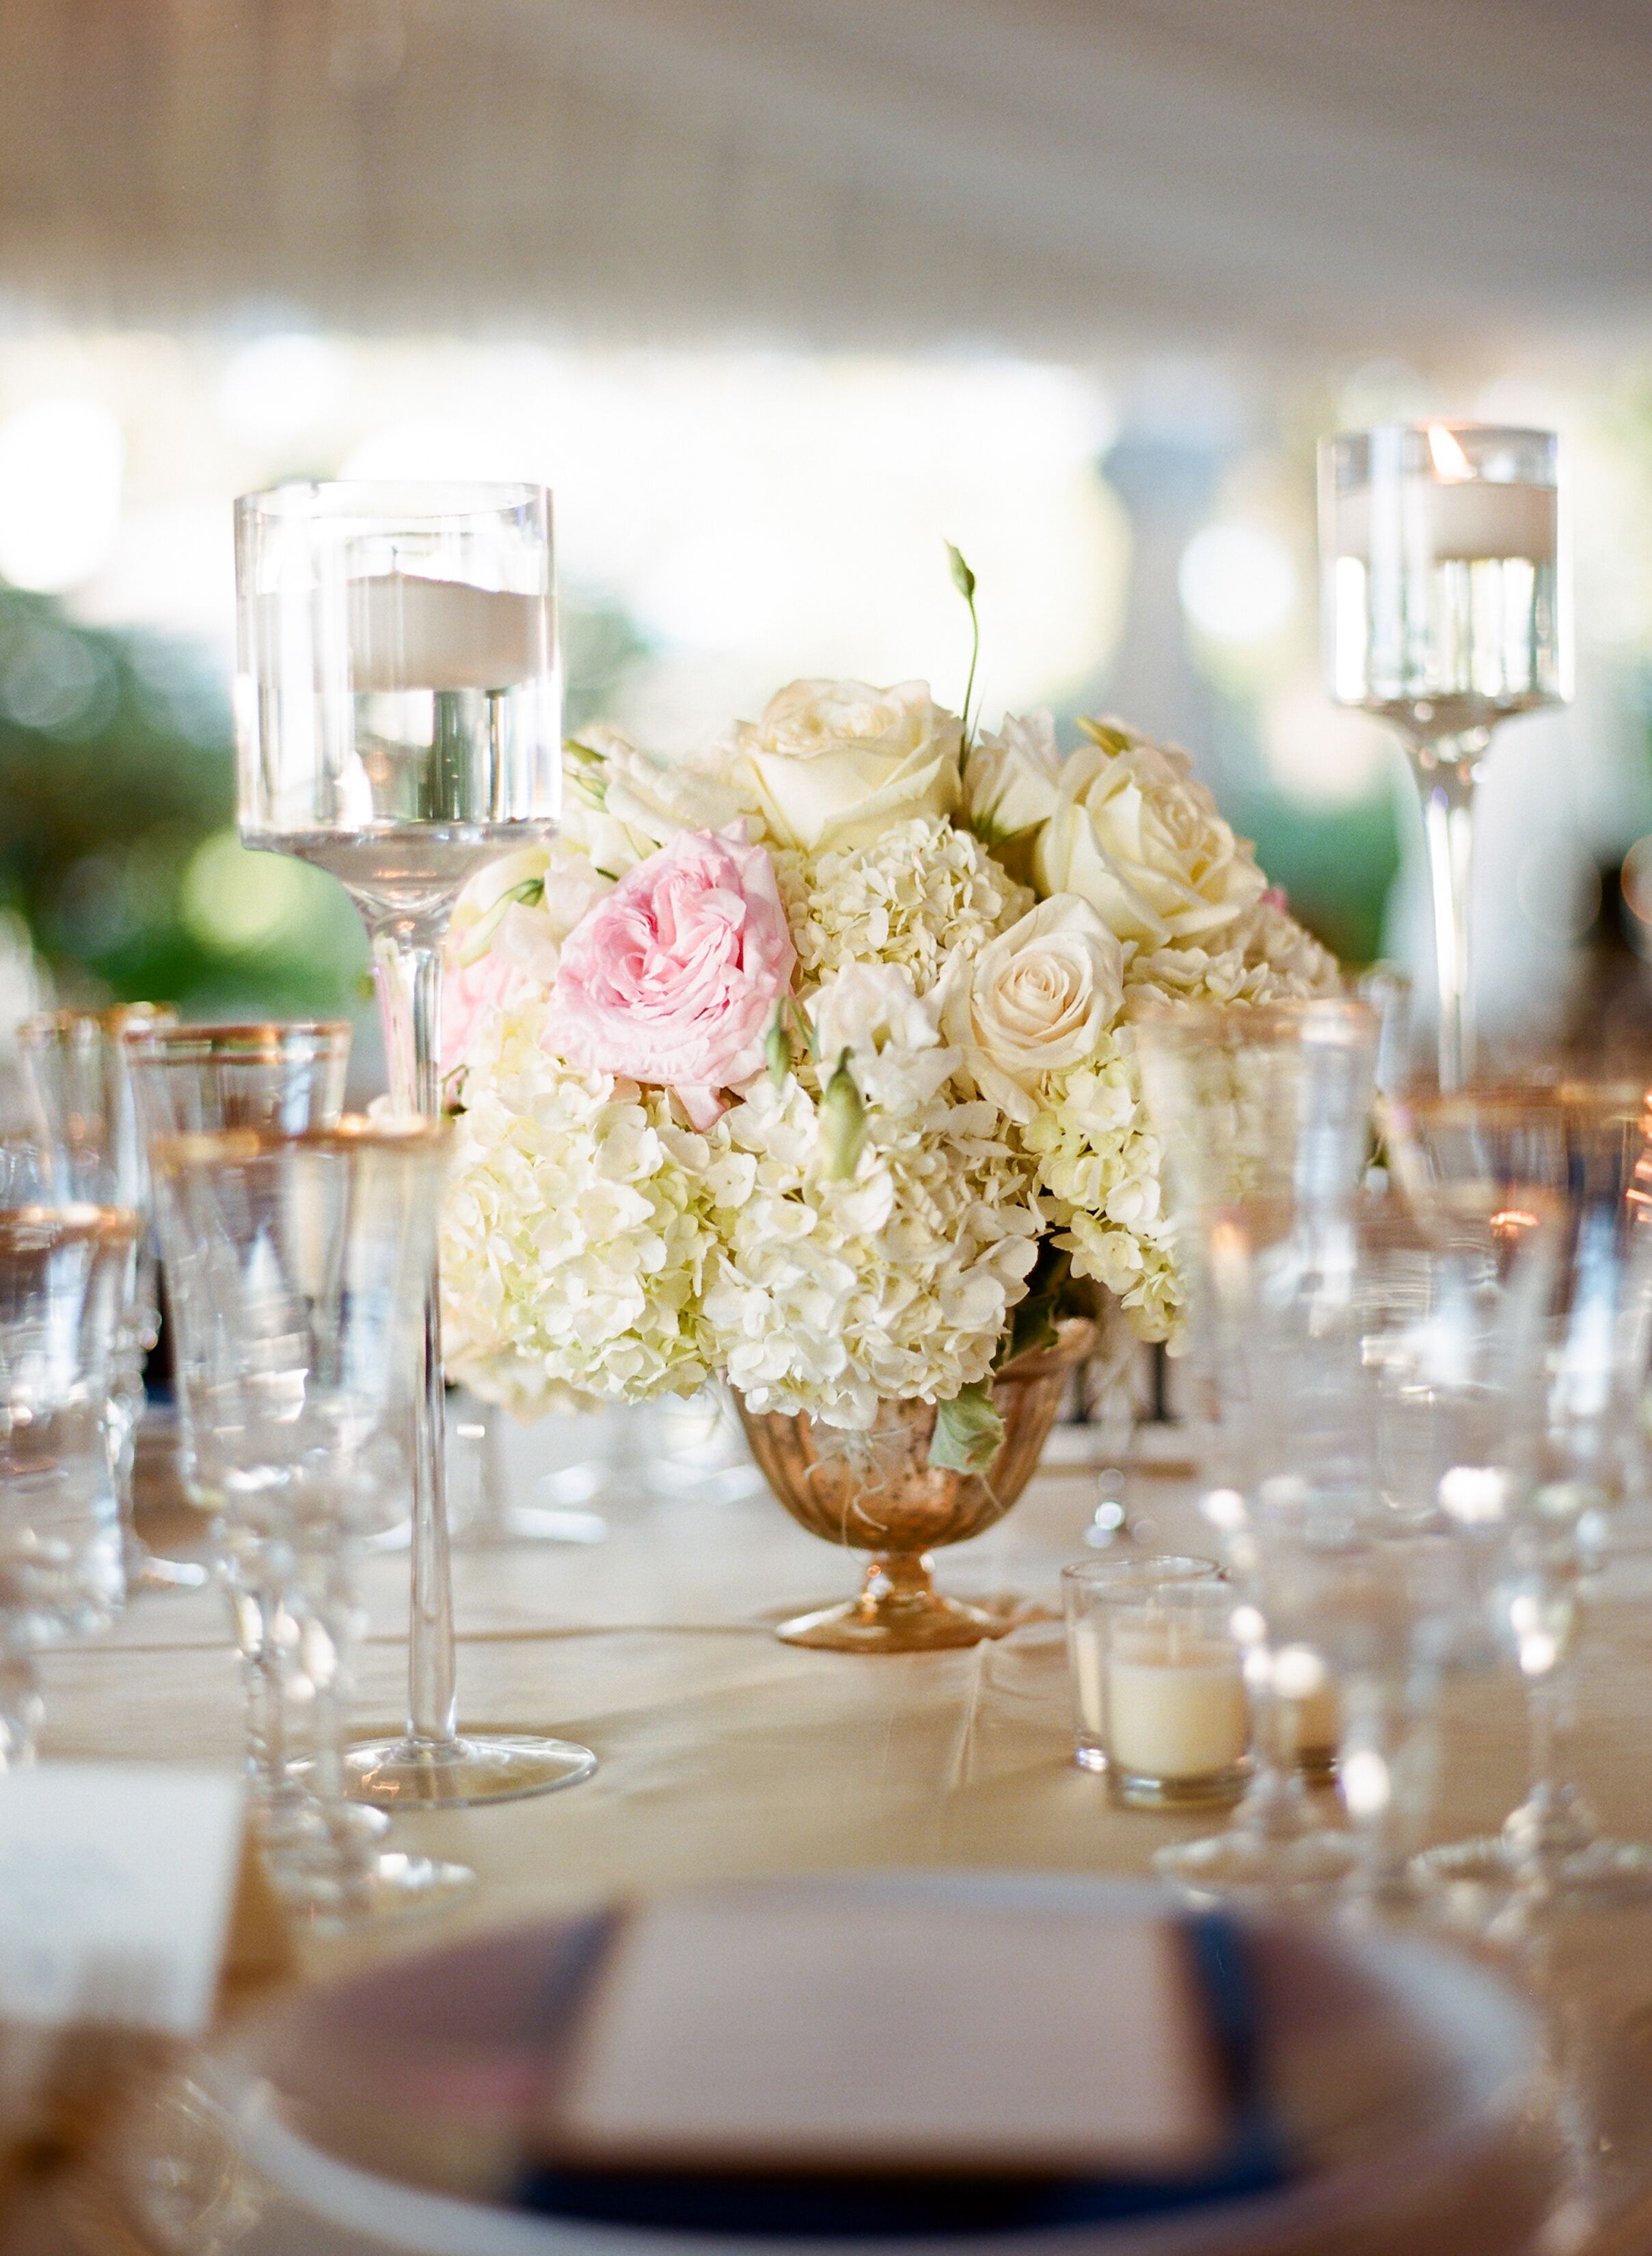 Gold Urn Centerpieces Filled with Ivory Arrangements